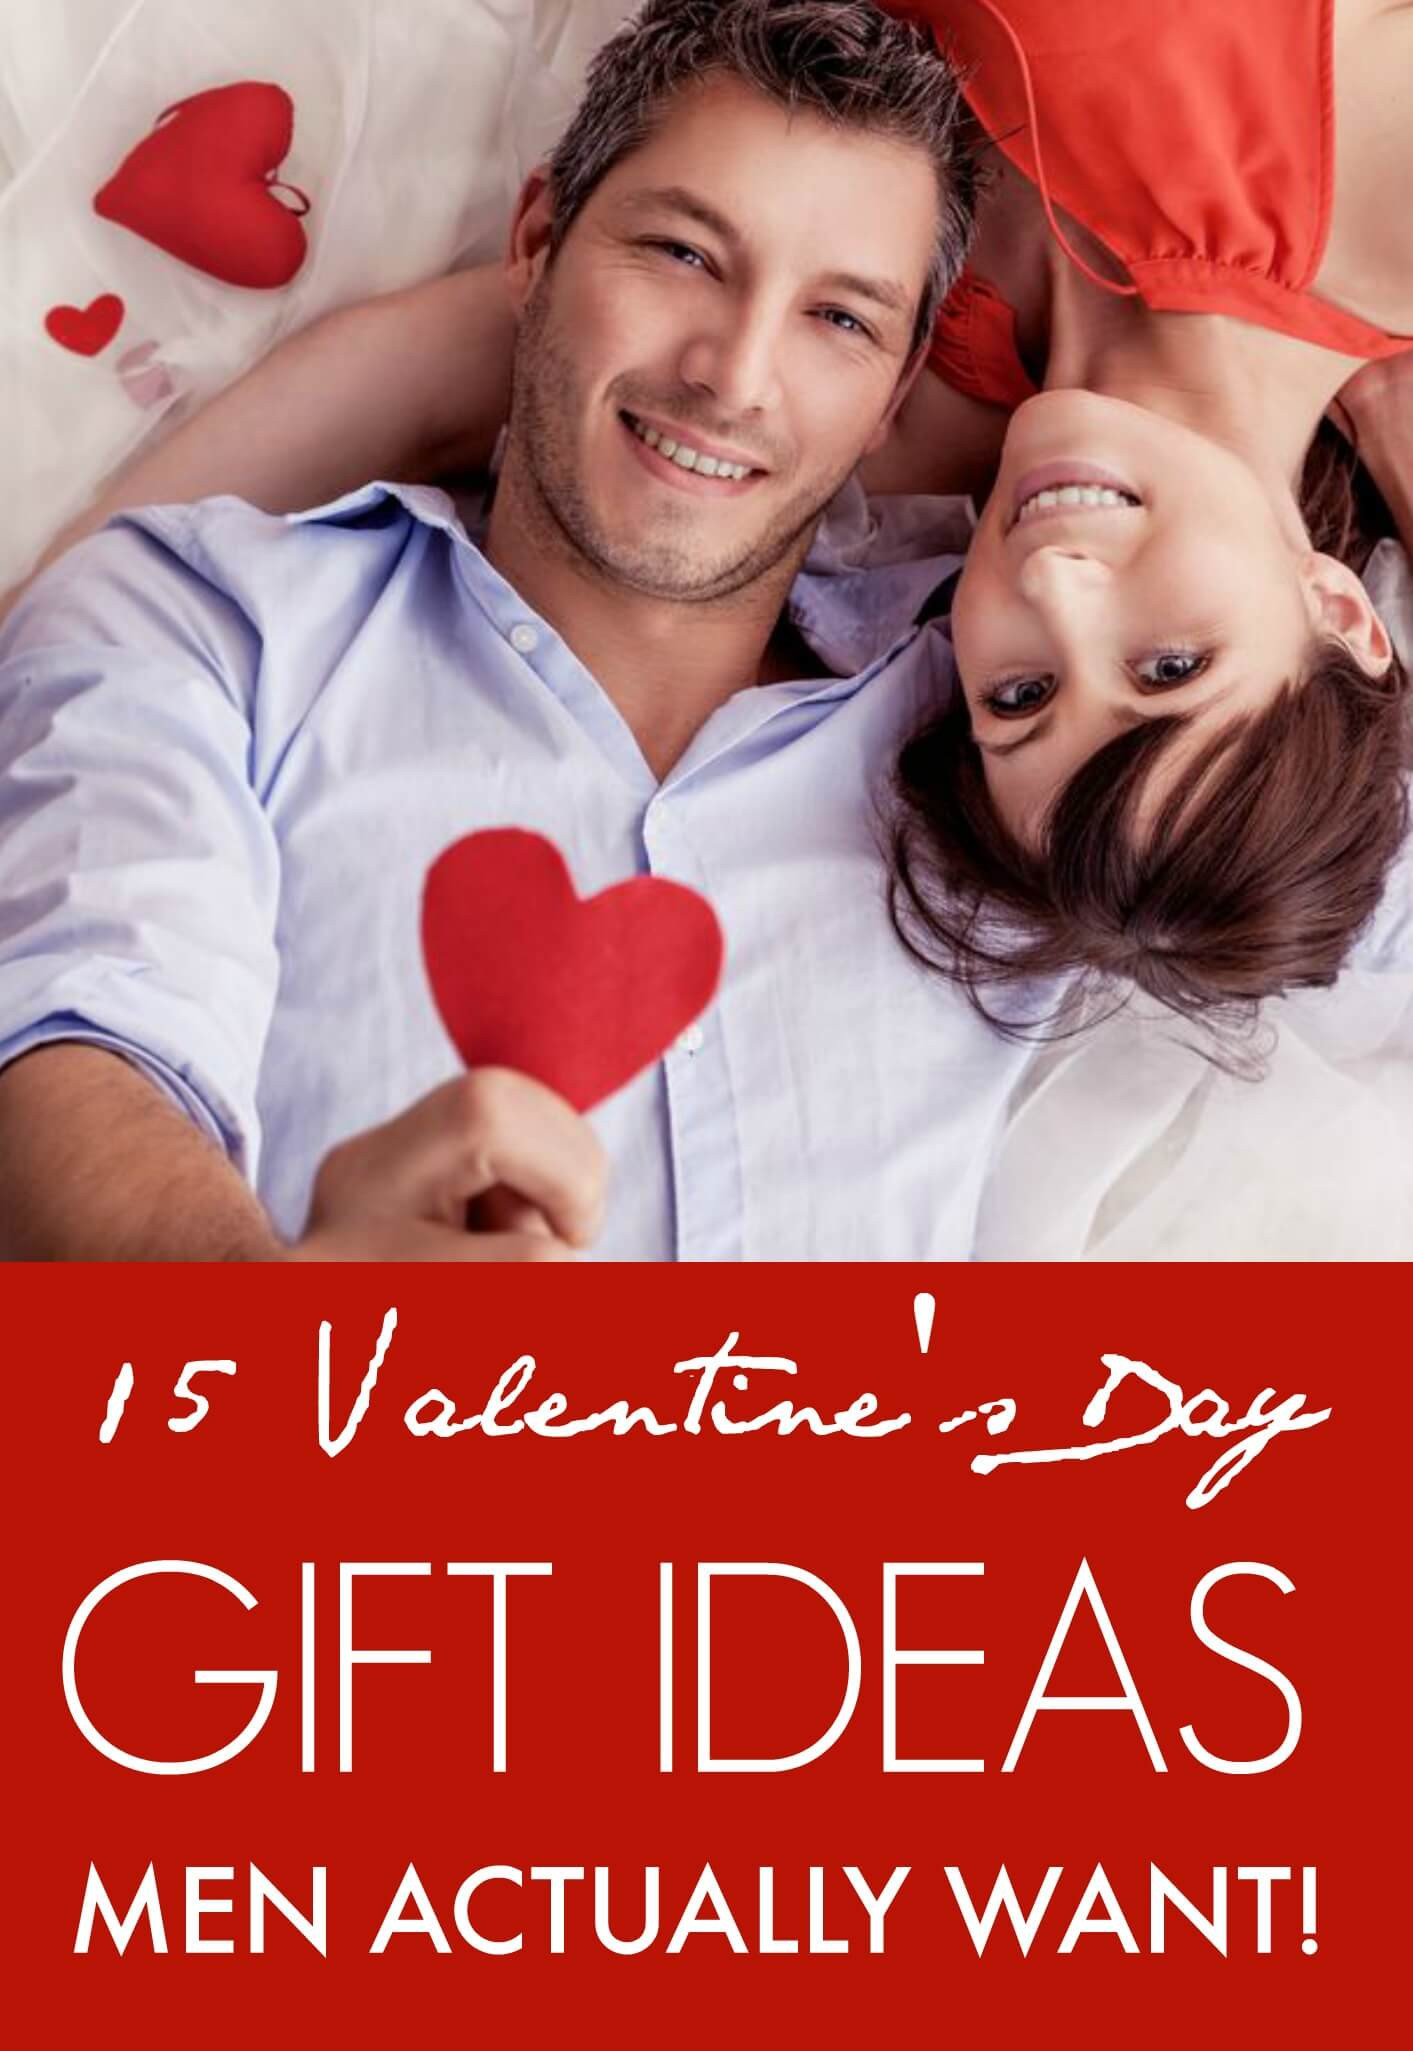 Valentines Day Gift Ideas Guys
 15 Valentine’s Day Gift ideas Men Actually Want